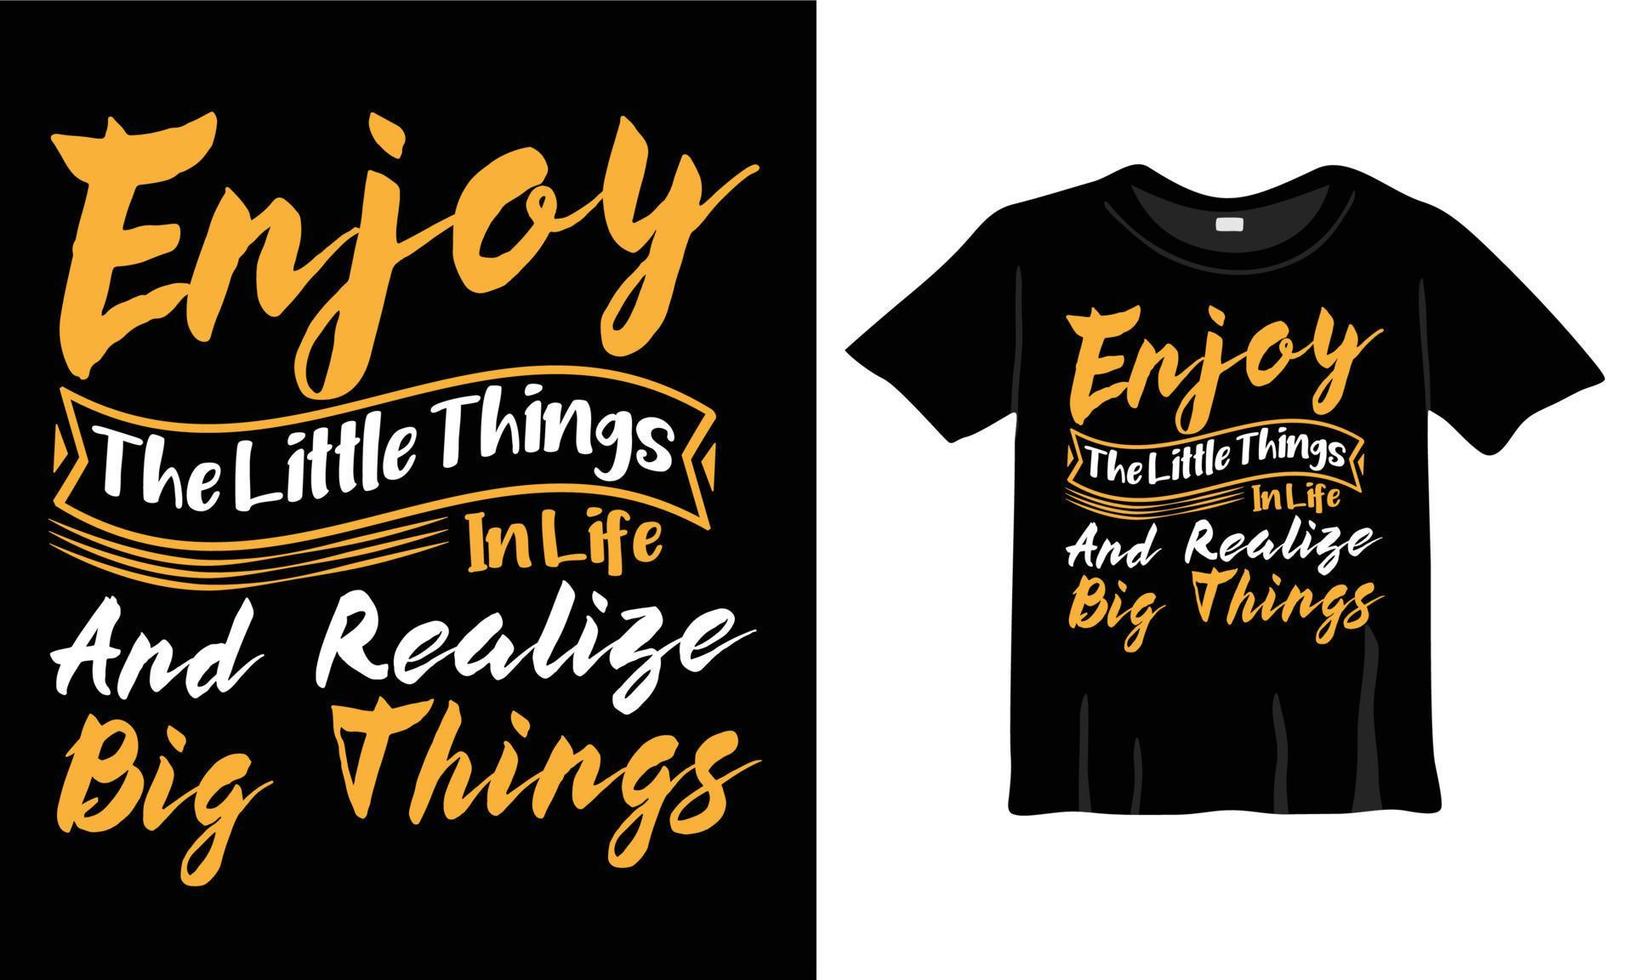 Best New Year T-Shirt. Motivational Quote T-Shirt Design for New Year Celebration vector